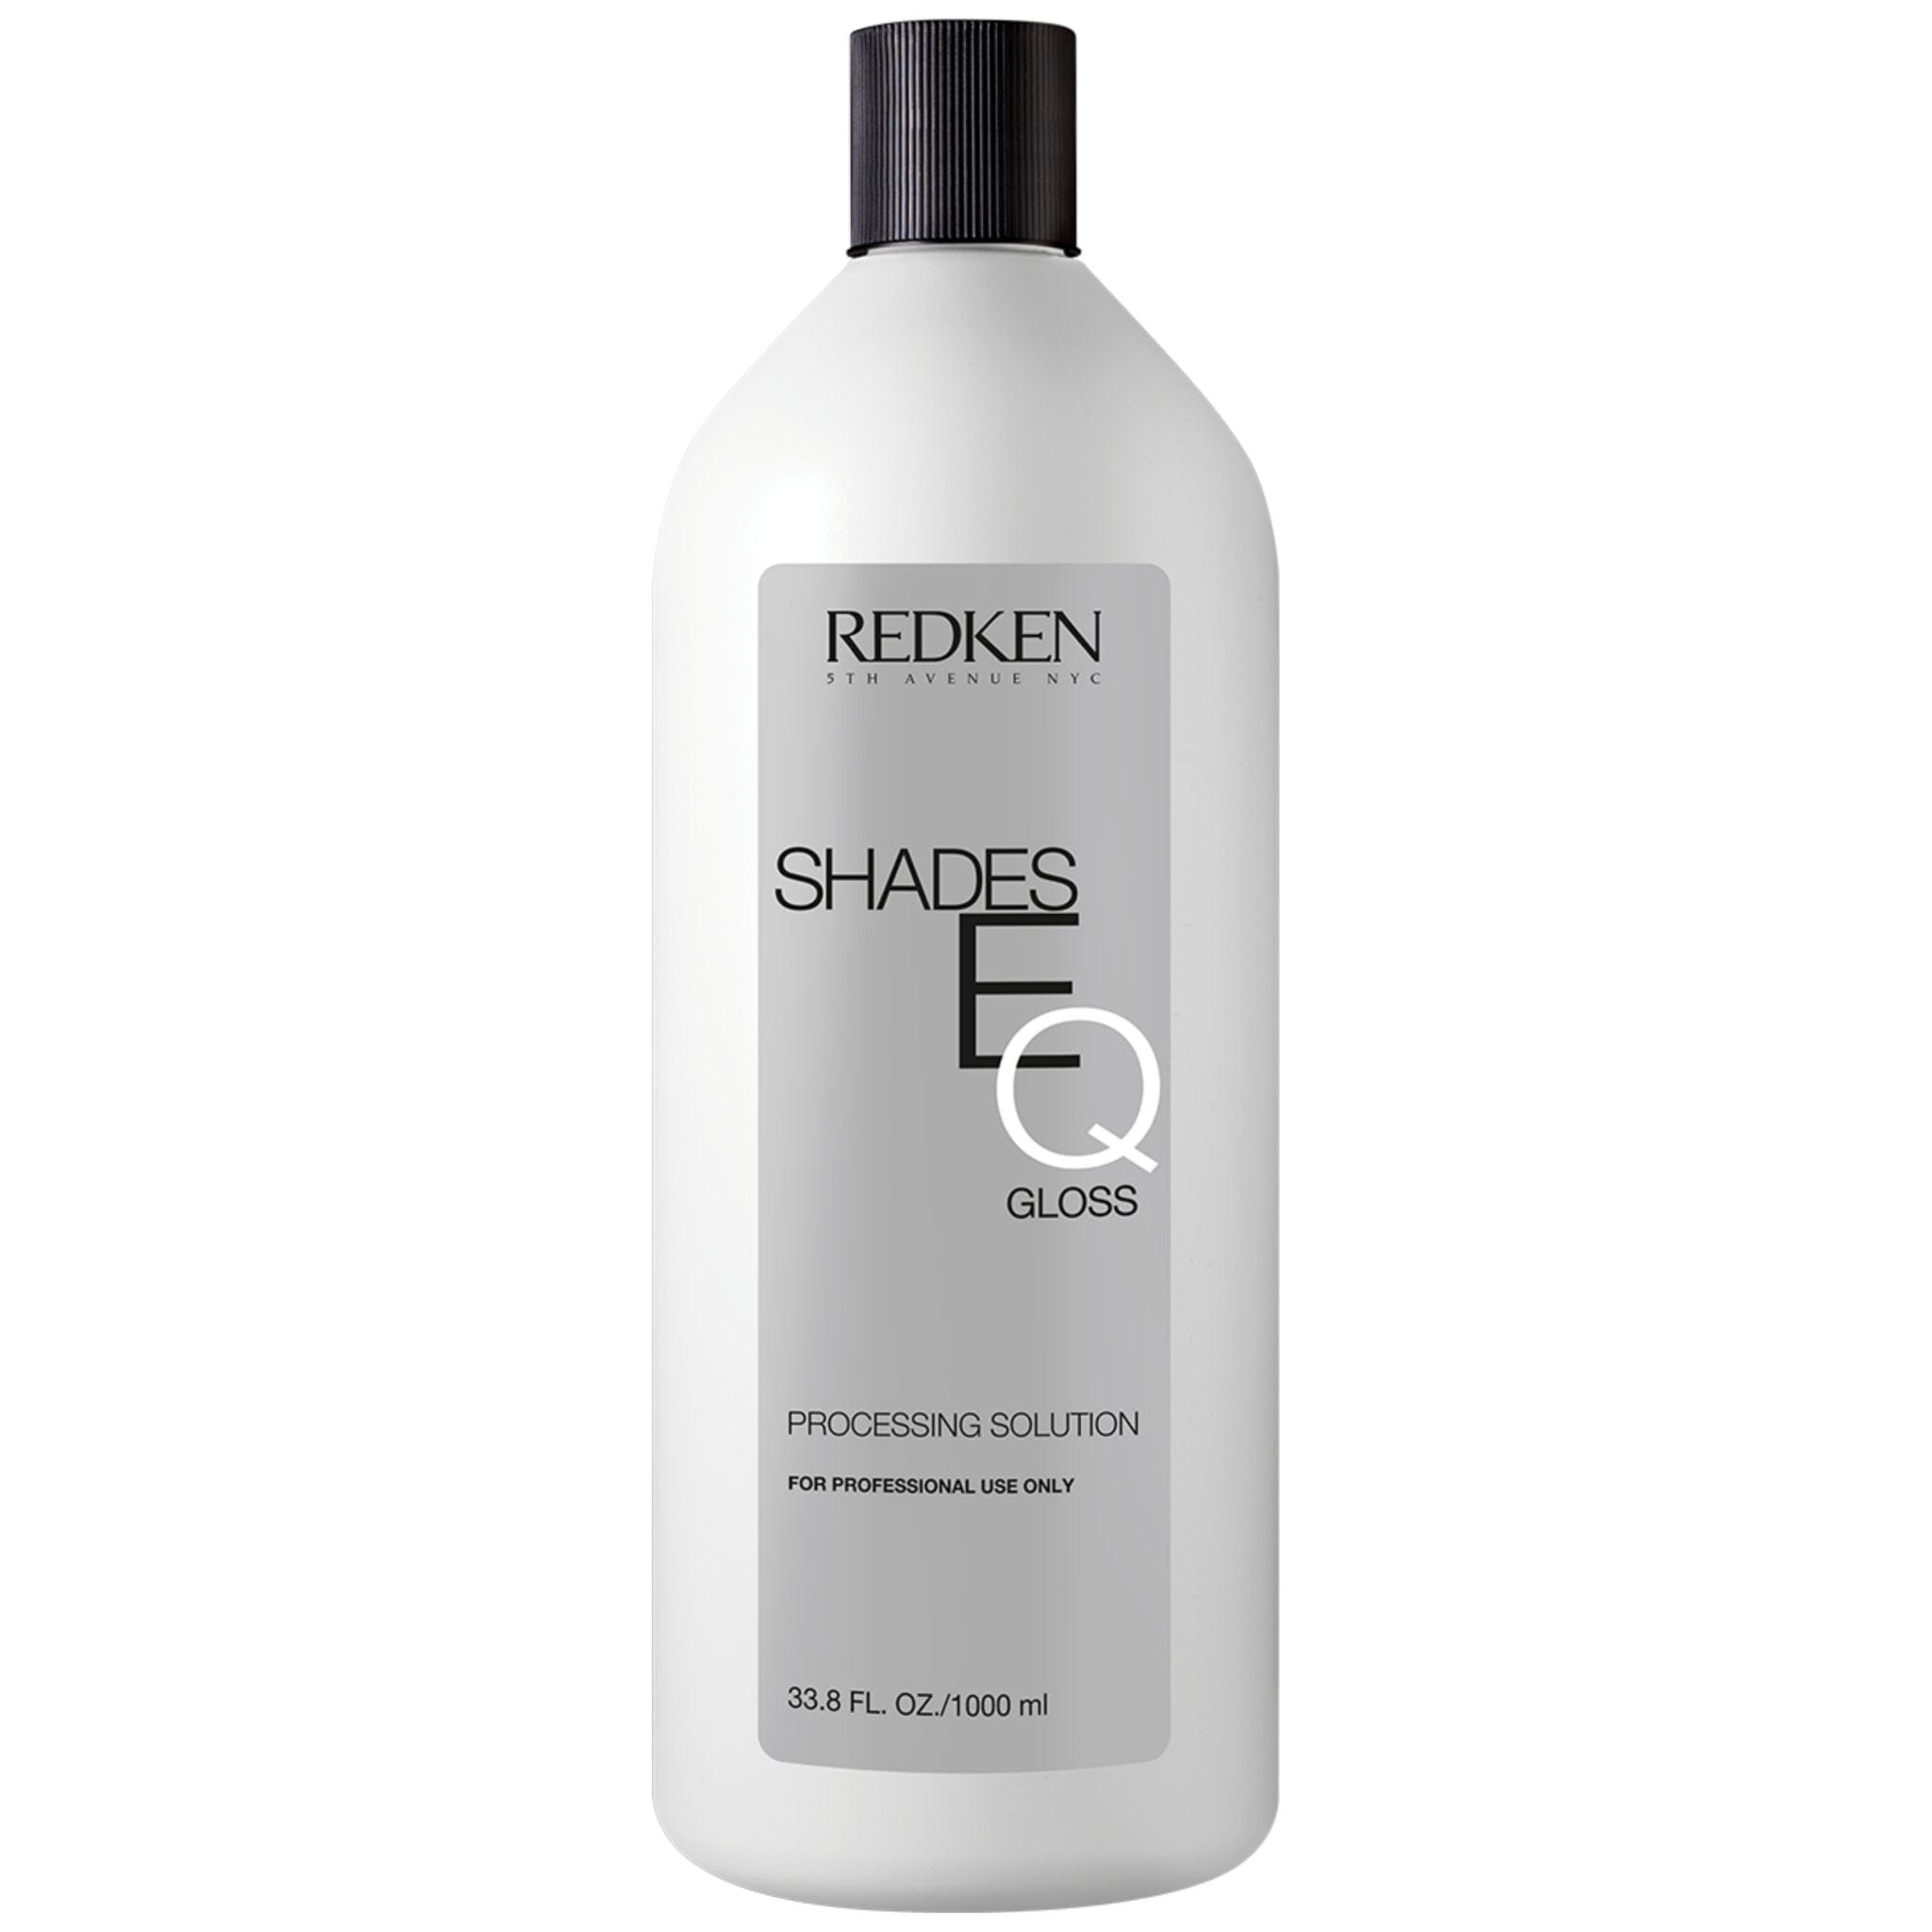 Redken® Shades EQ PROCESSING SOLUTION 1LT - HairBeautyInk